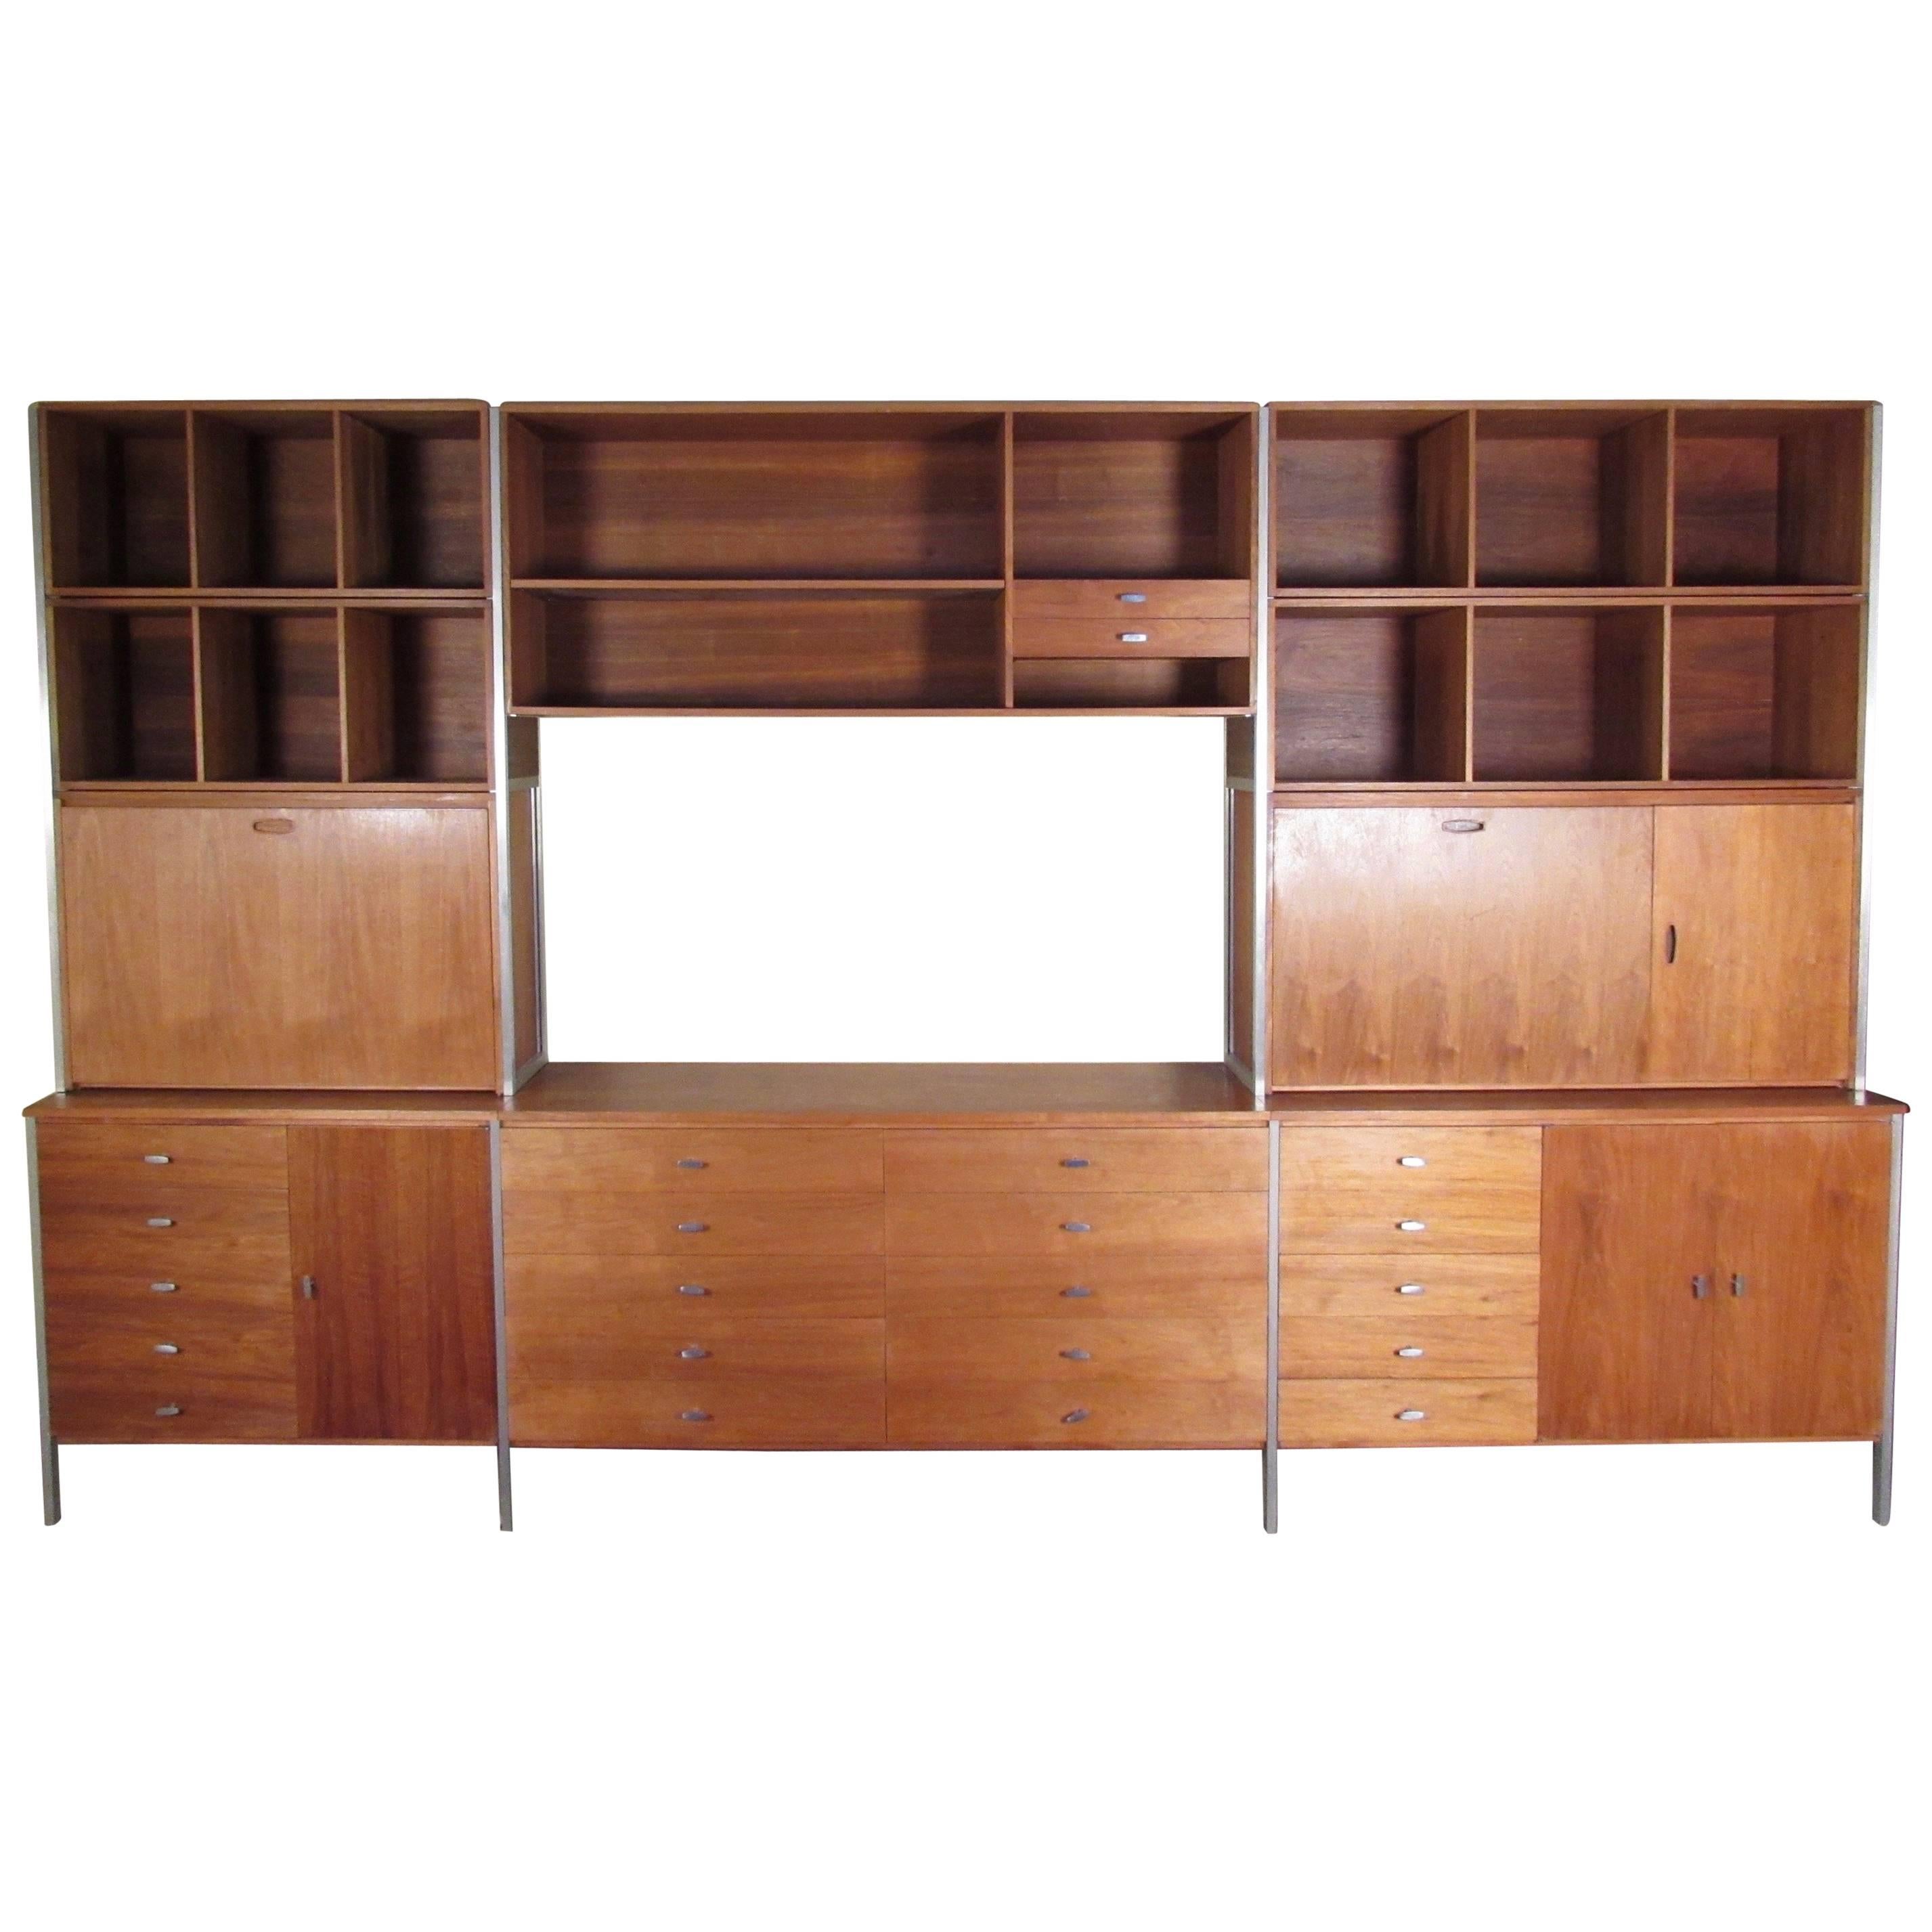 Paul McCobb "Connoisseur Collection" Wall Unit for H Sacks and Sons